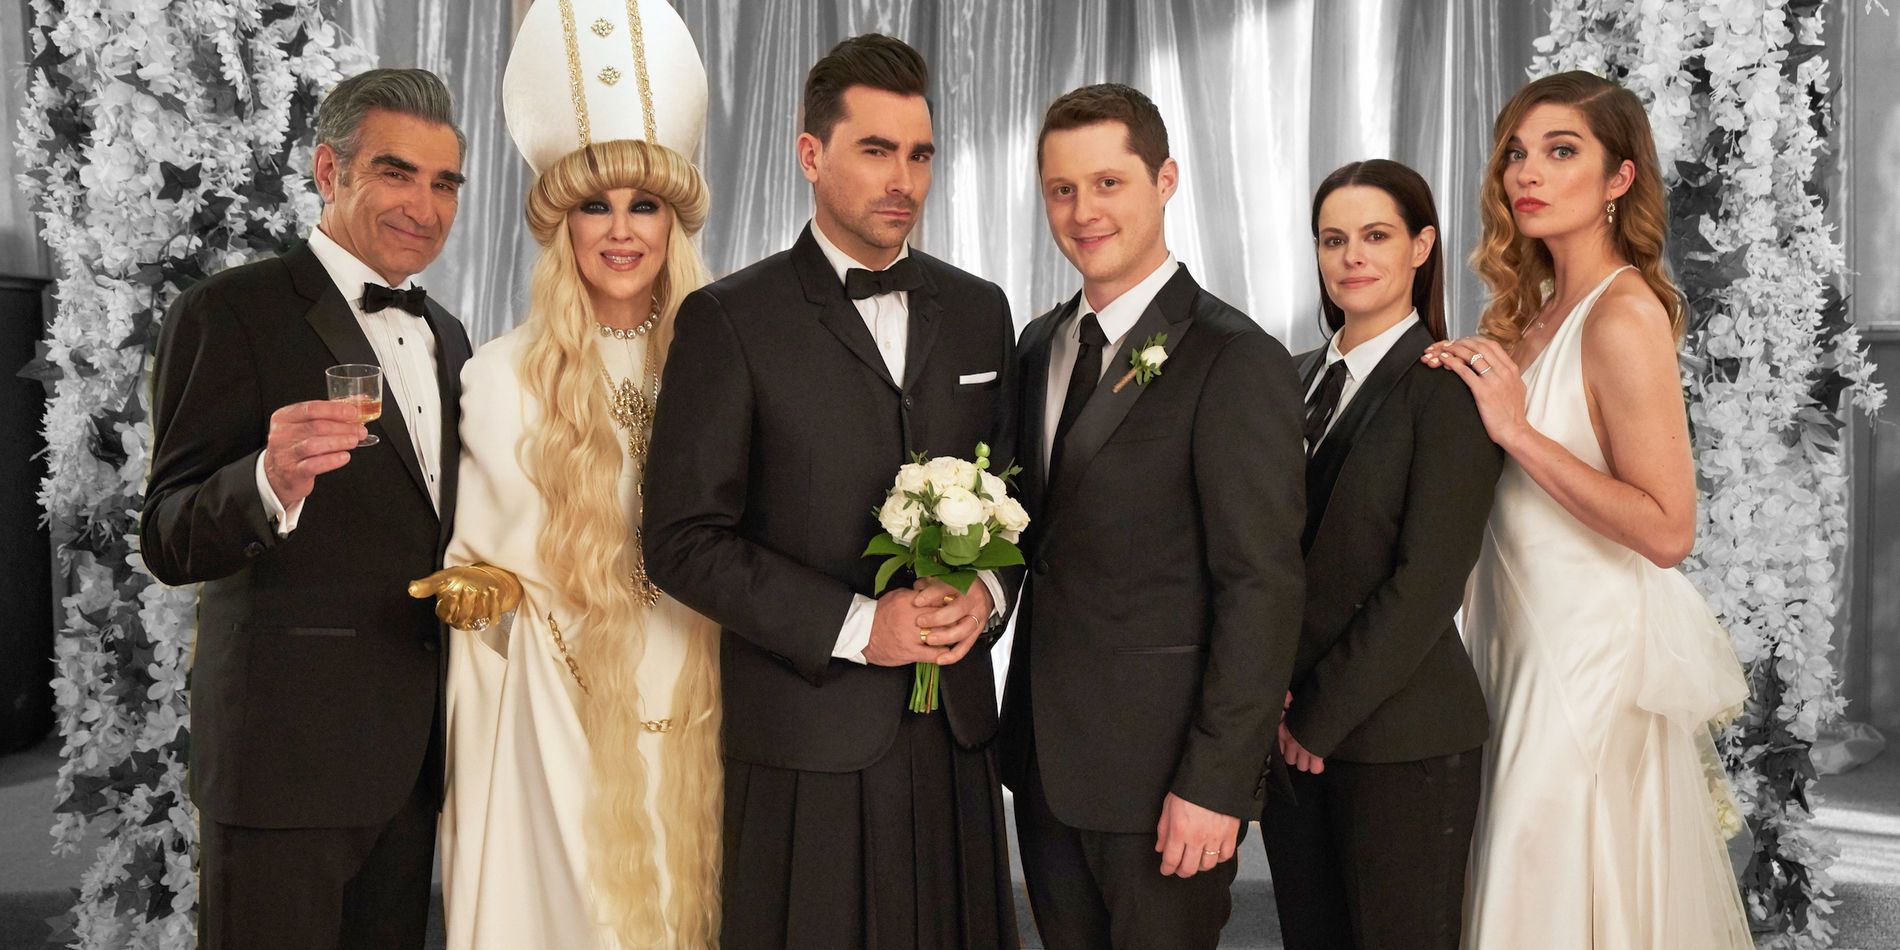 Schitts Creek Season 6 Finale Wedding photo of Rose family with Patrick and Stevie